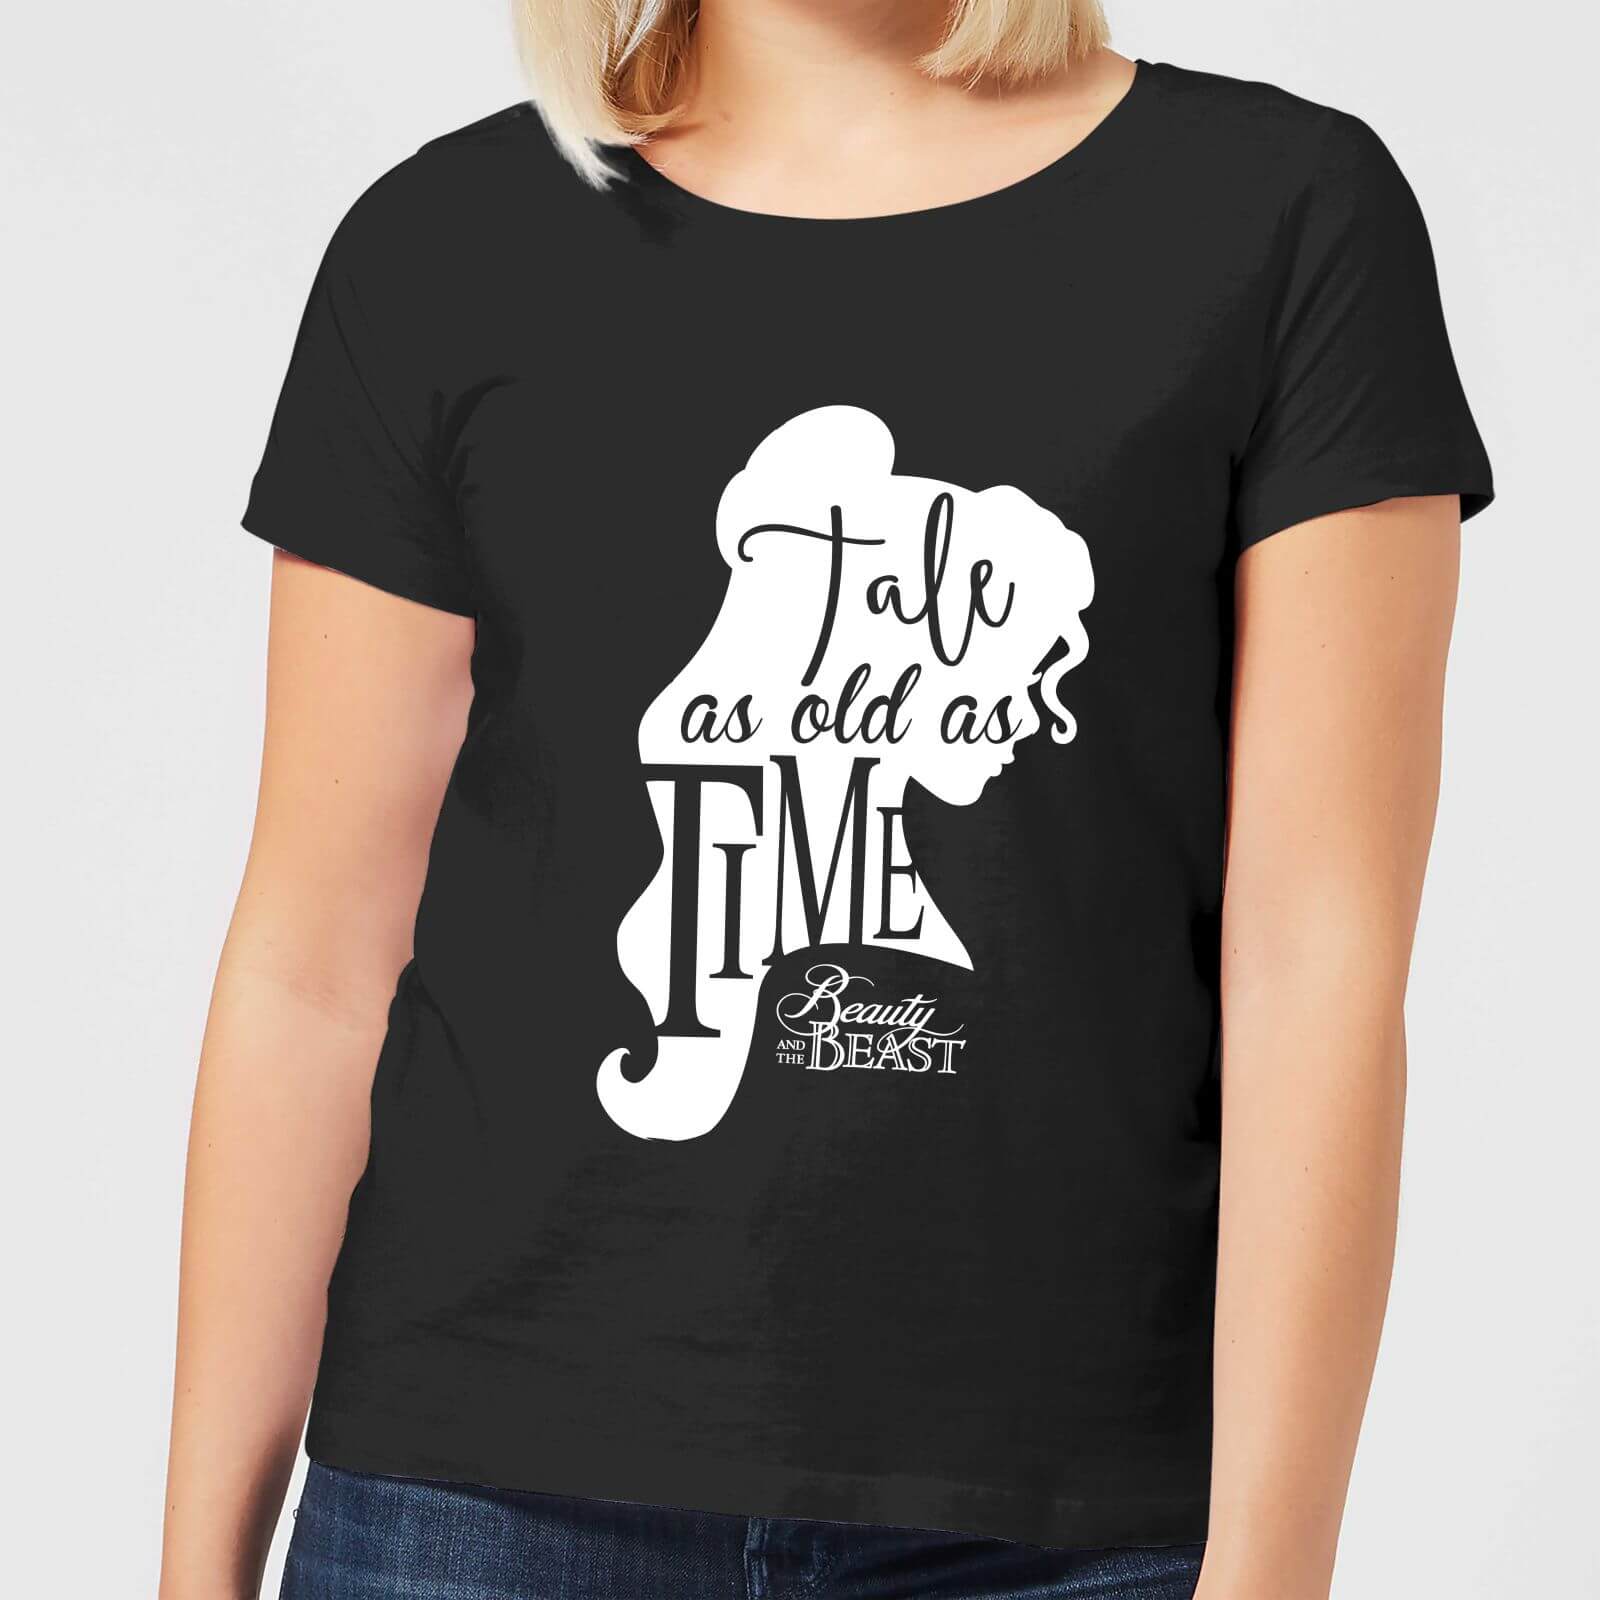 Disney Beauty And The Beast Princess Belle Tale As Old As Time Women's T-Shirt - Black - 3XL - Black